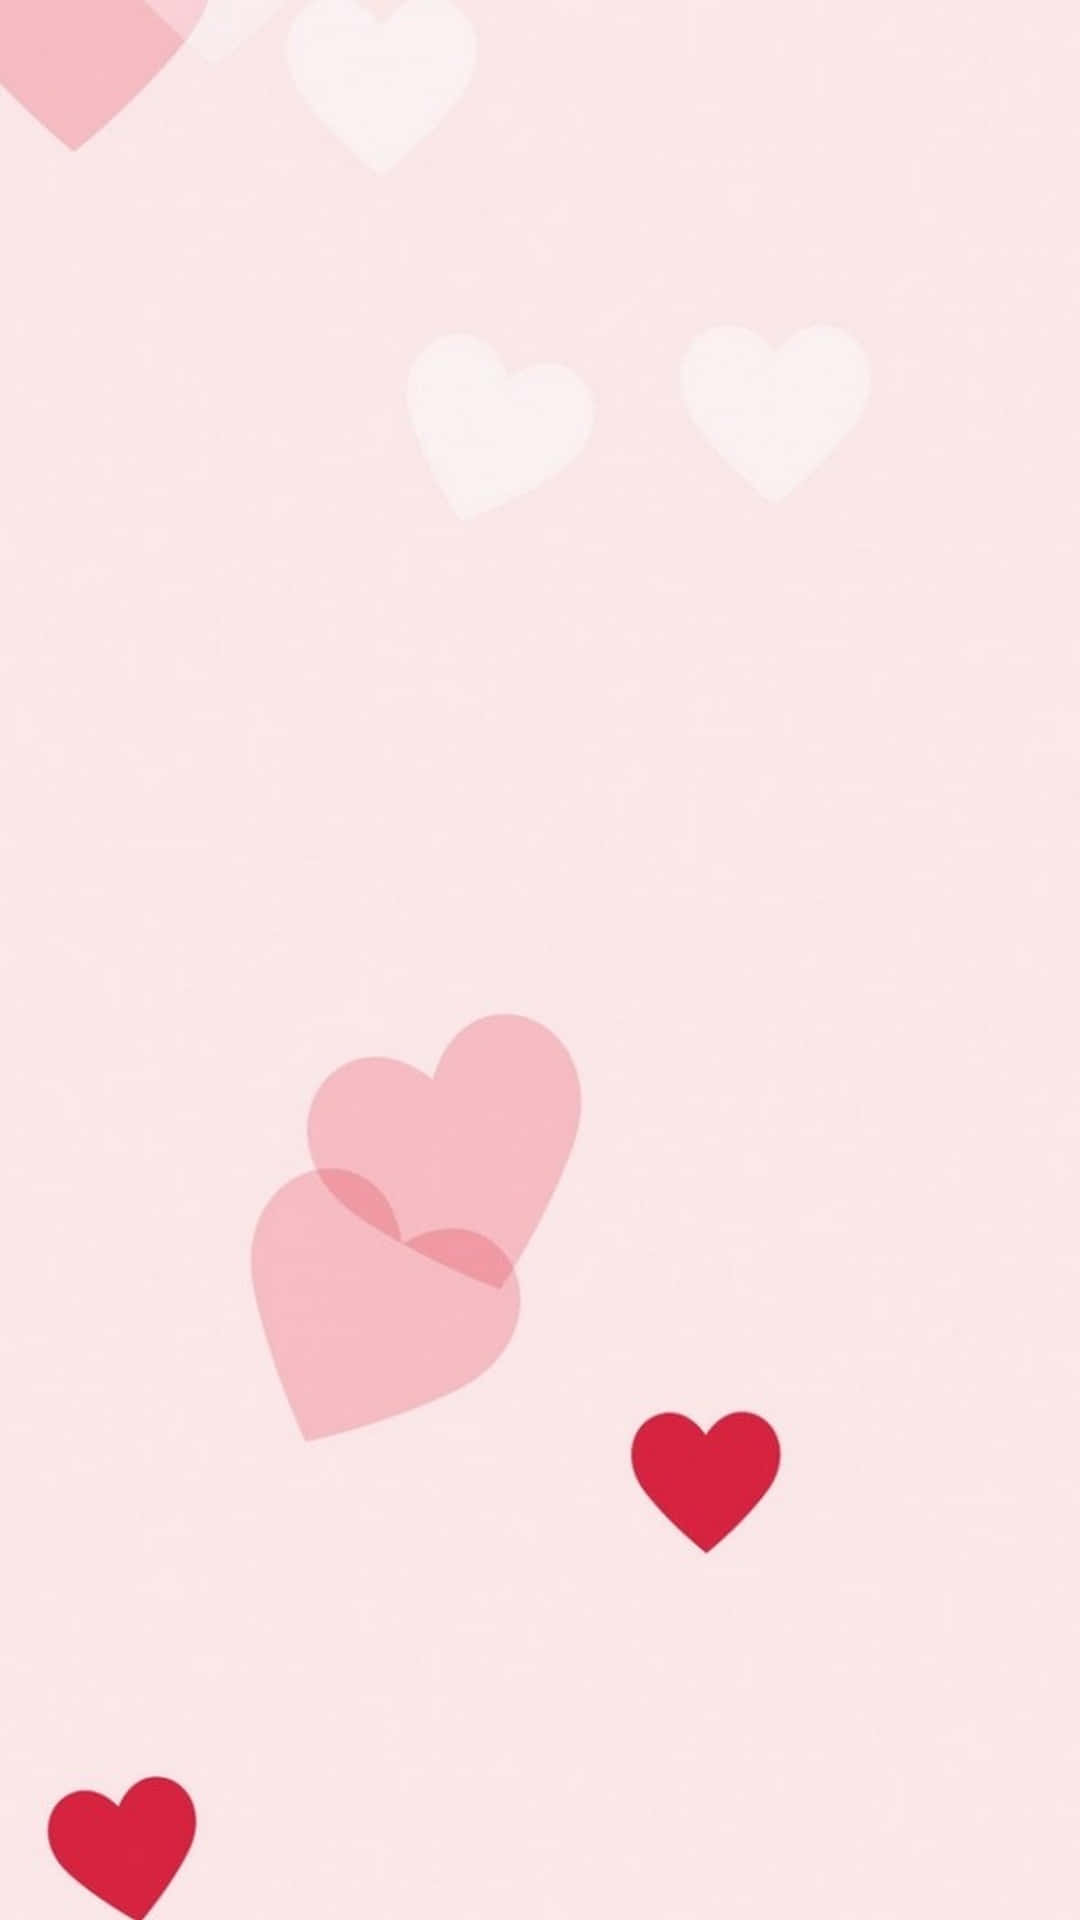 Valentine's Day Wallpaper With Hearts